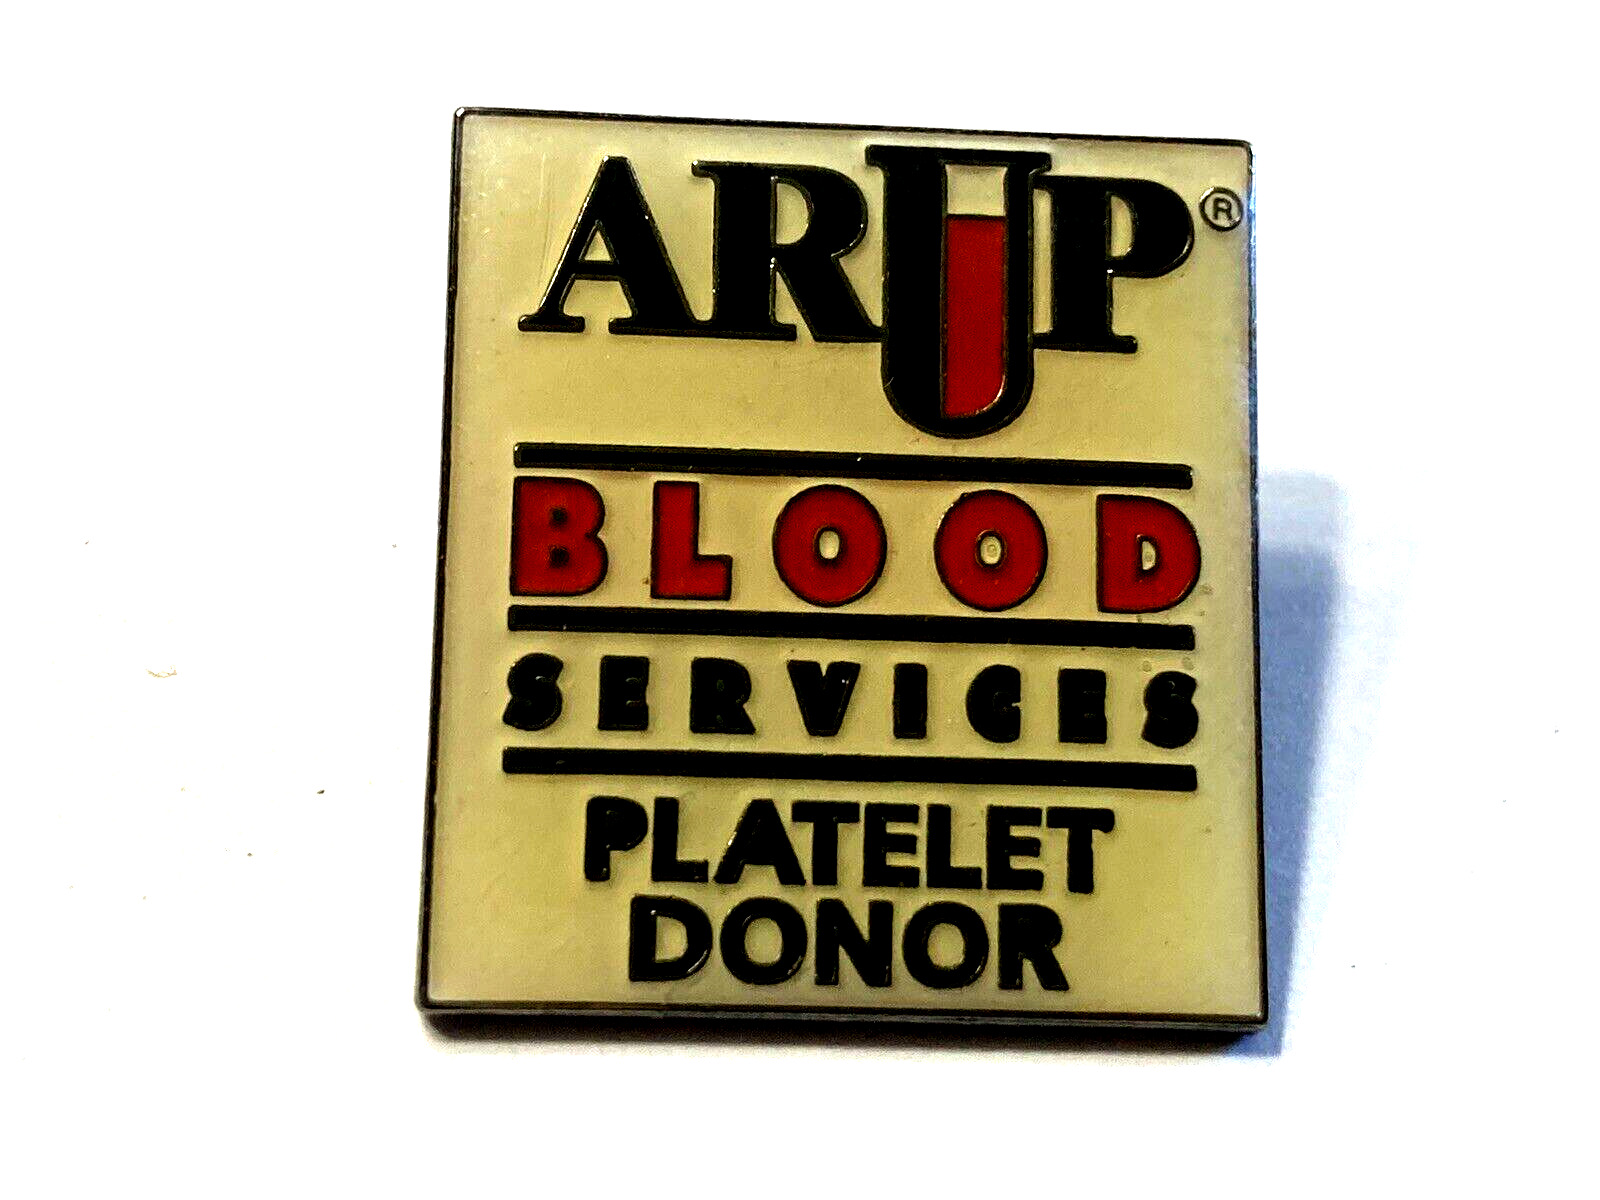 ARUP Blood Services Platelet Donor Lapel Pin